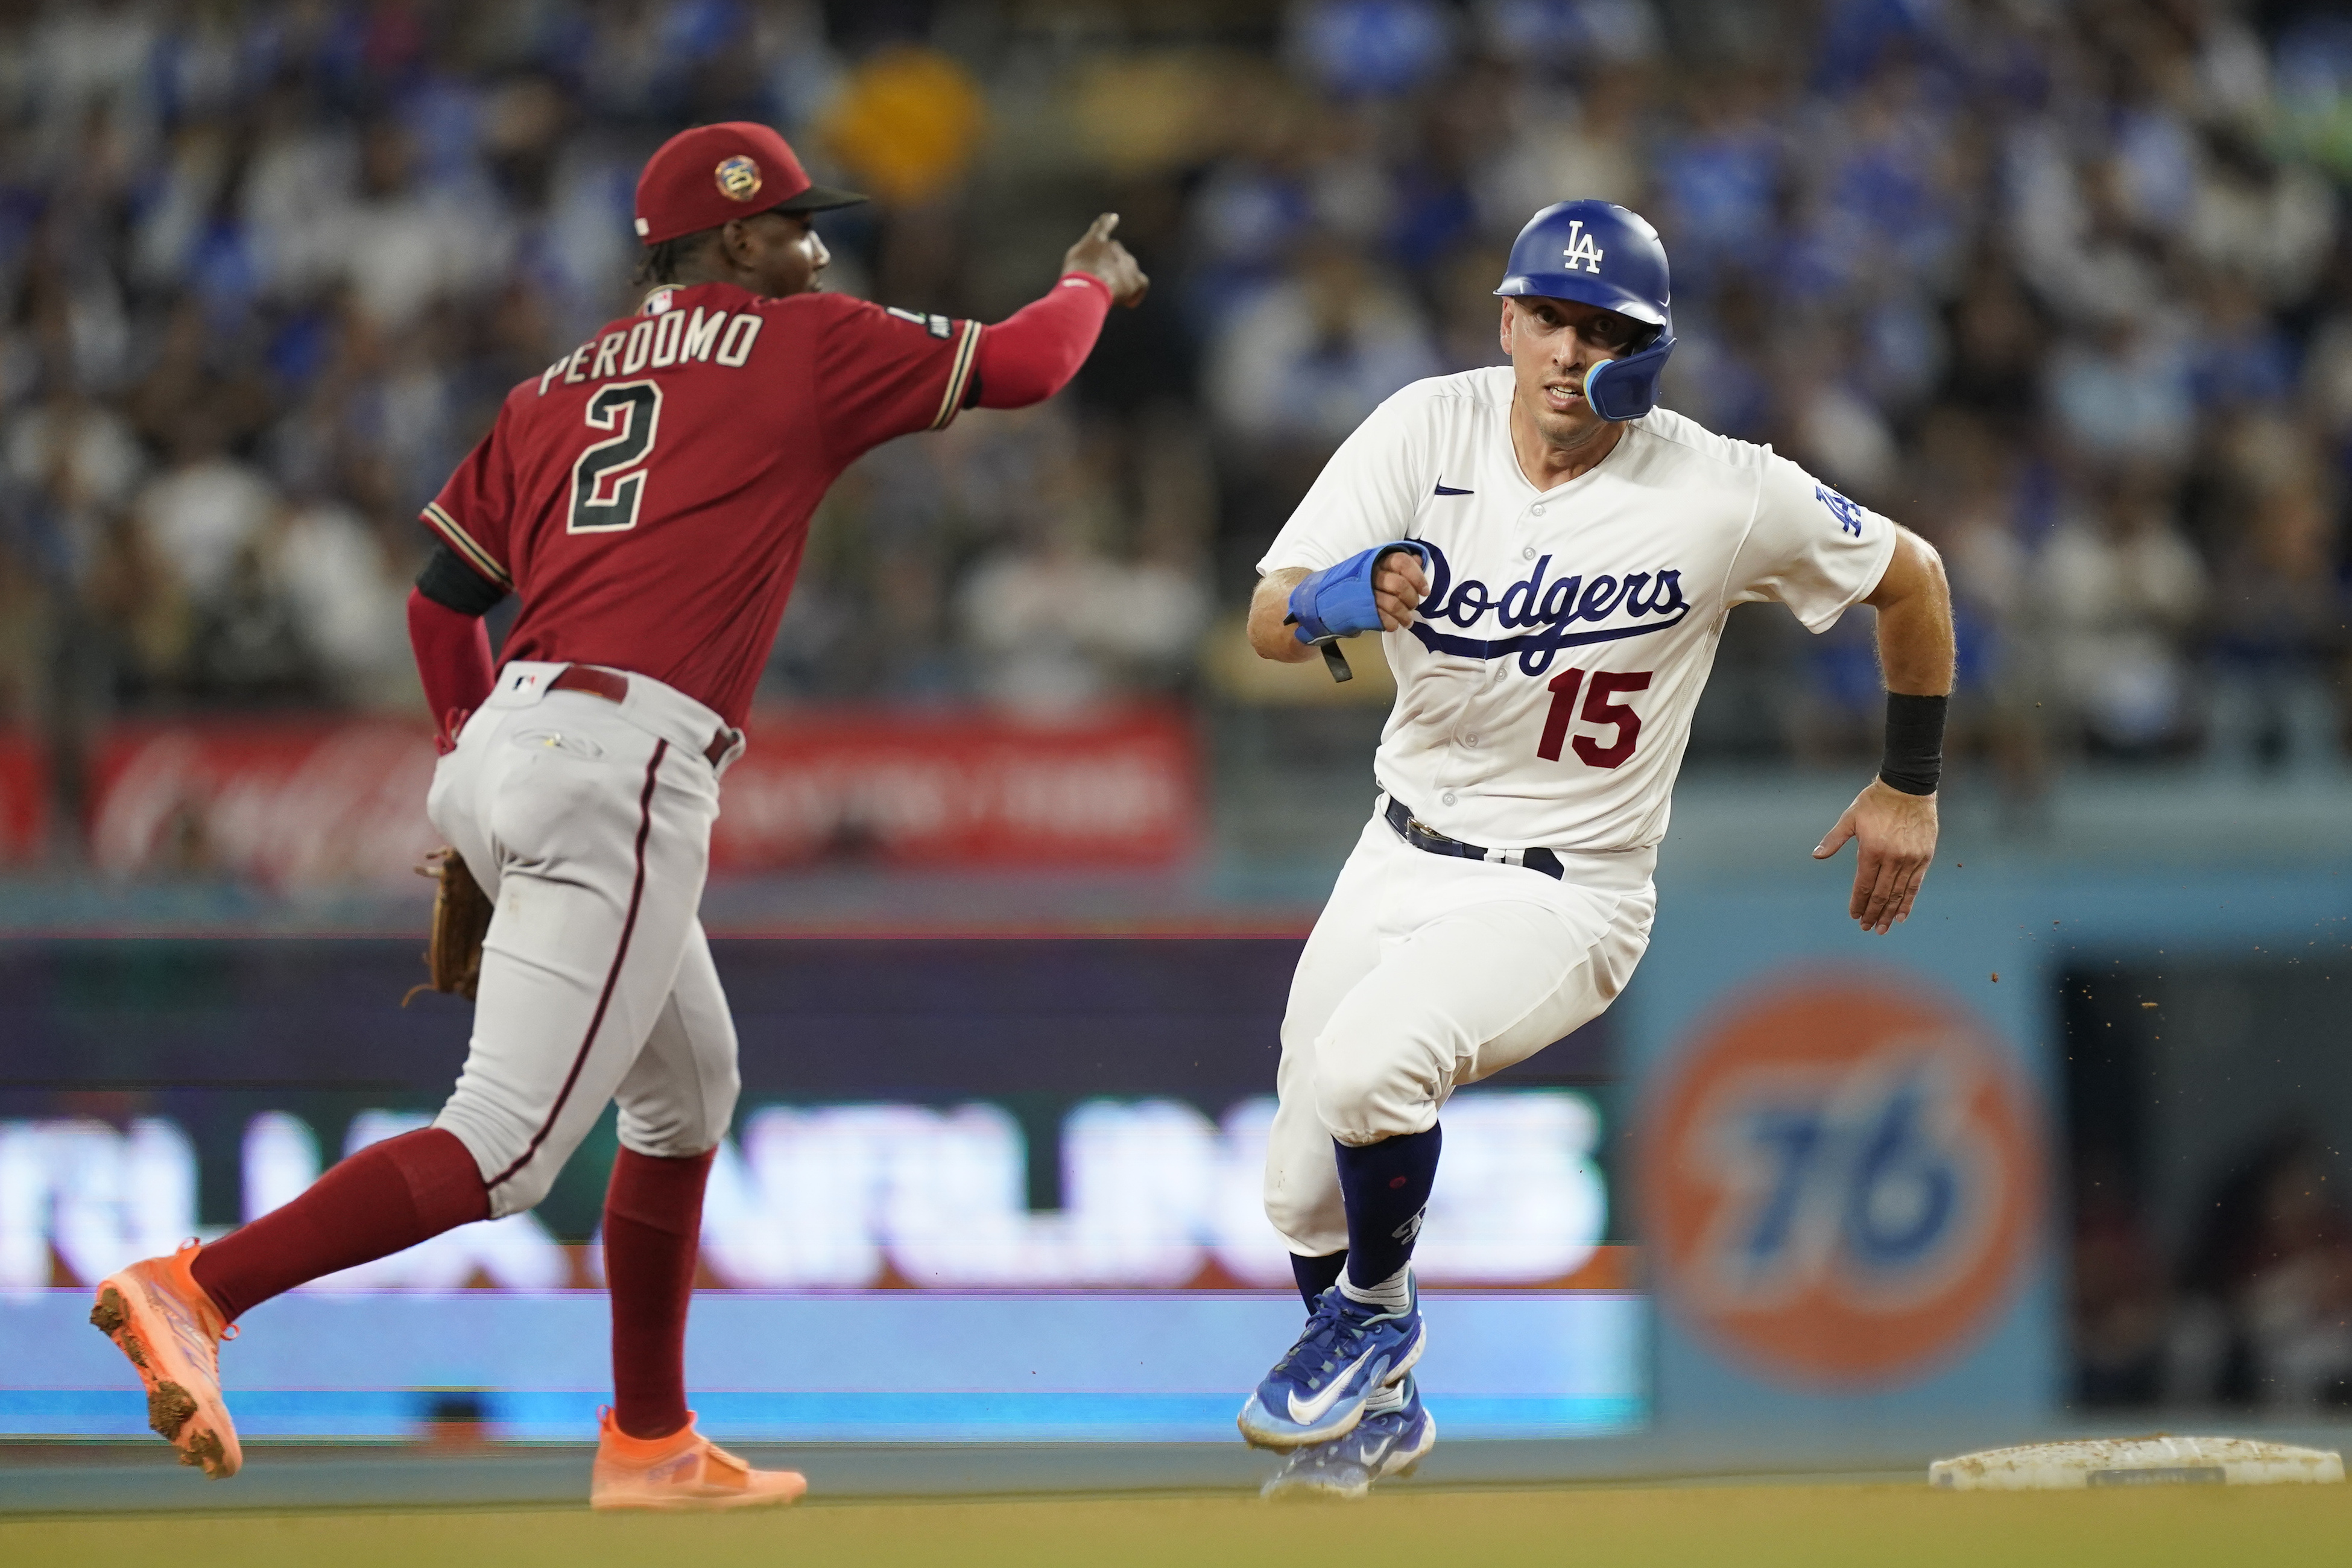 Dodgers beat the Braves 3-1 to avoid a 4-game series sweep in a clash of  the NL's best